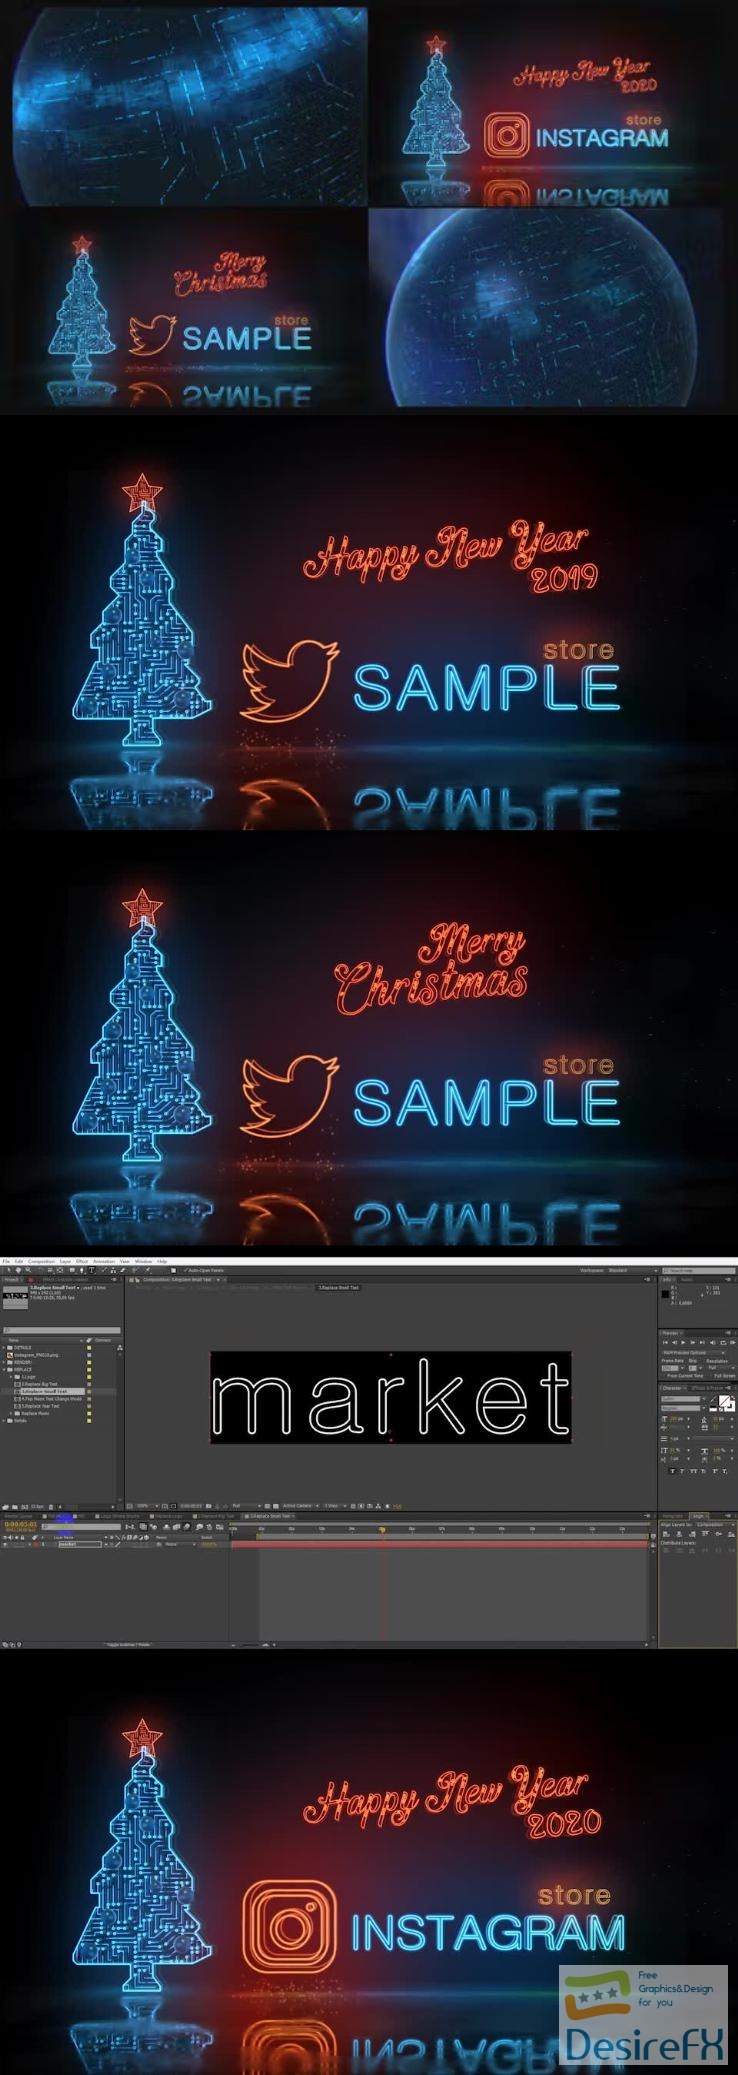 Videohive Happy New Year and Merry Christmas Digital Neon Logo Reveal 2 mode 22933077